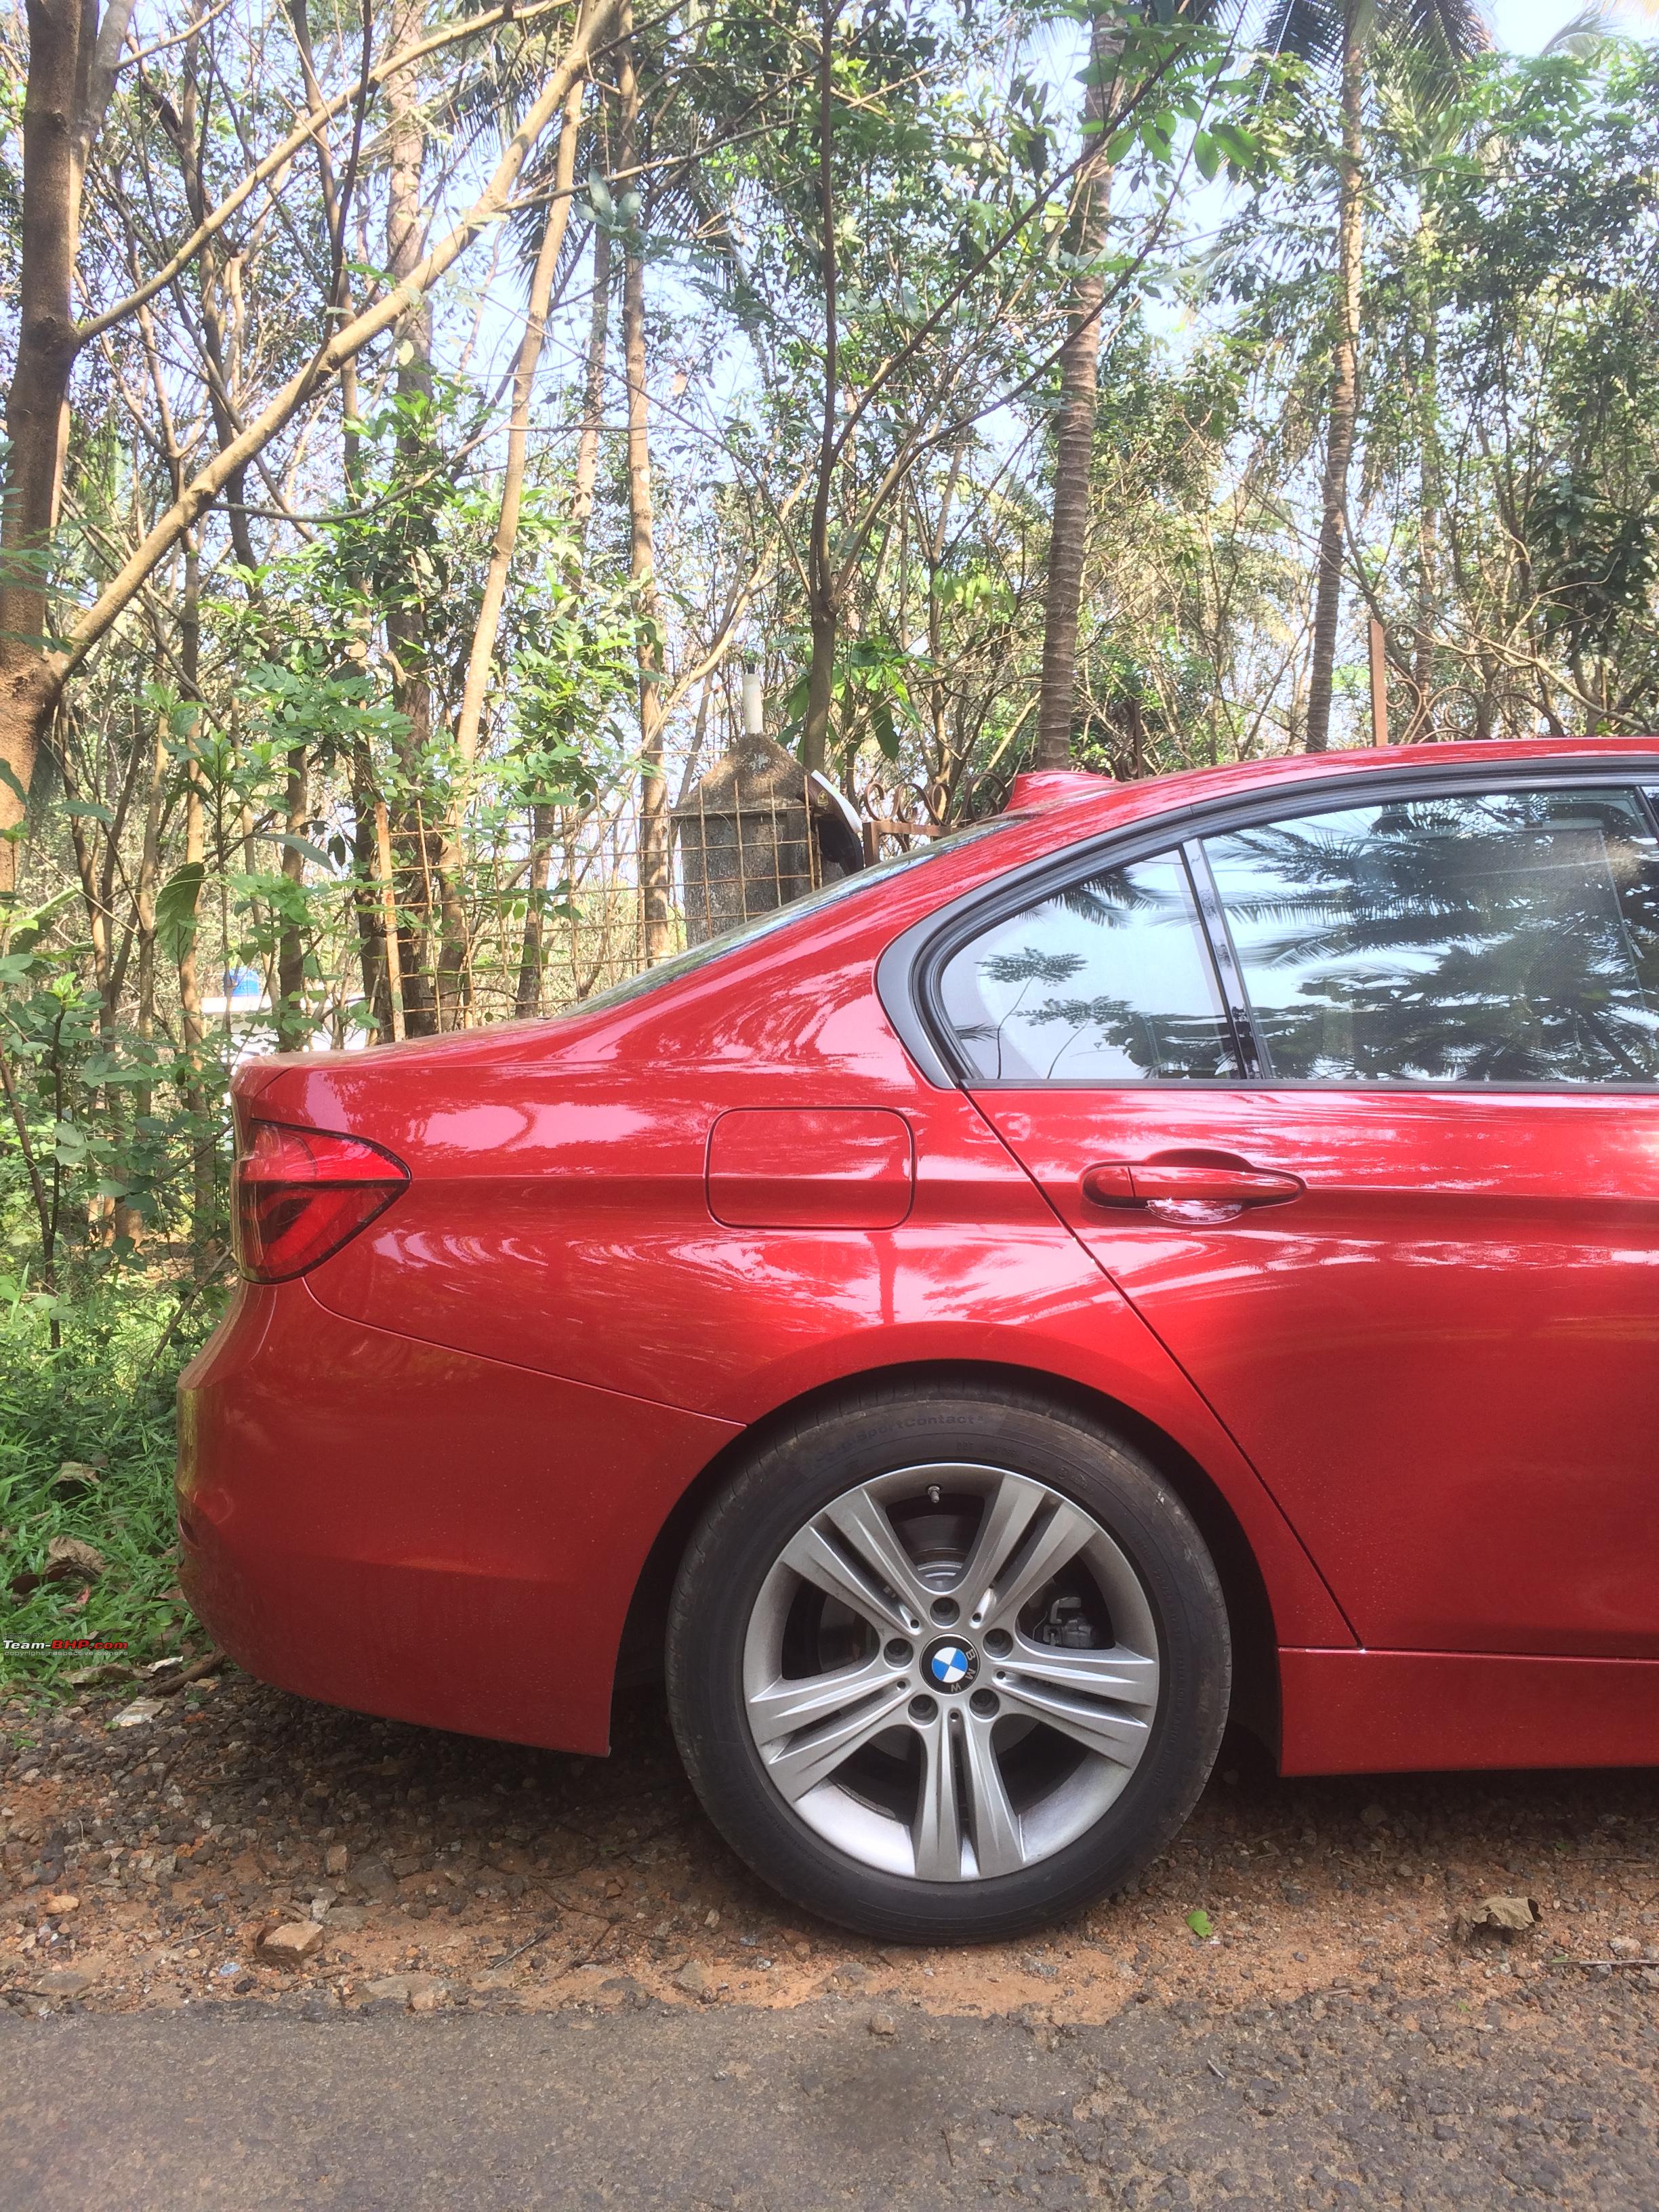 BMW 320d & 328i (F30) : Official Review - Page 120 - Team-BHP